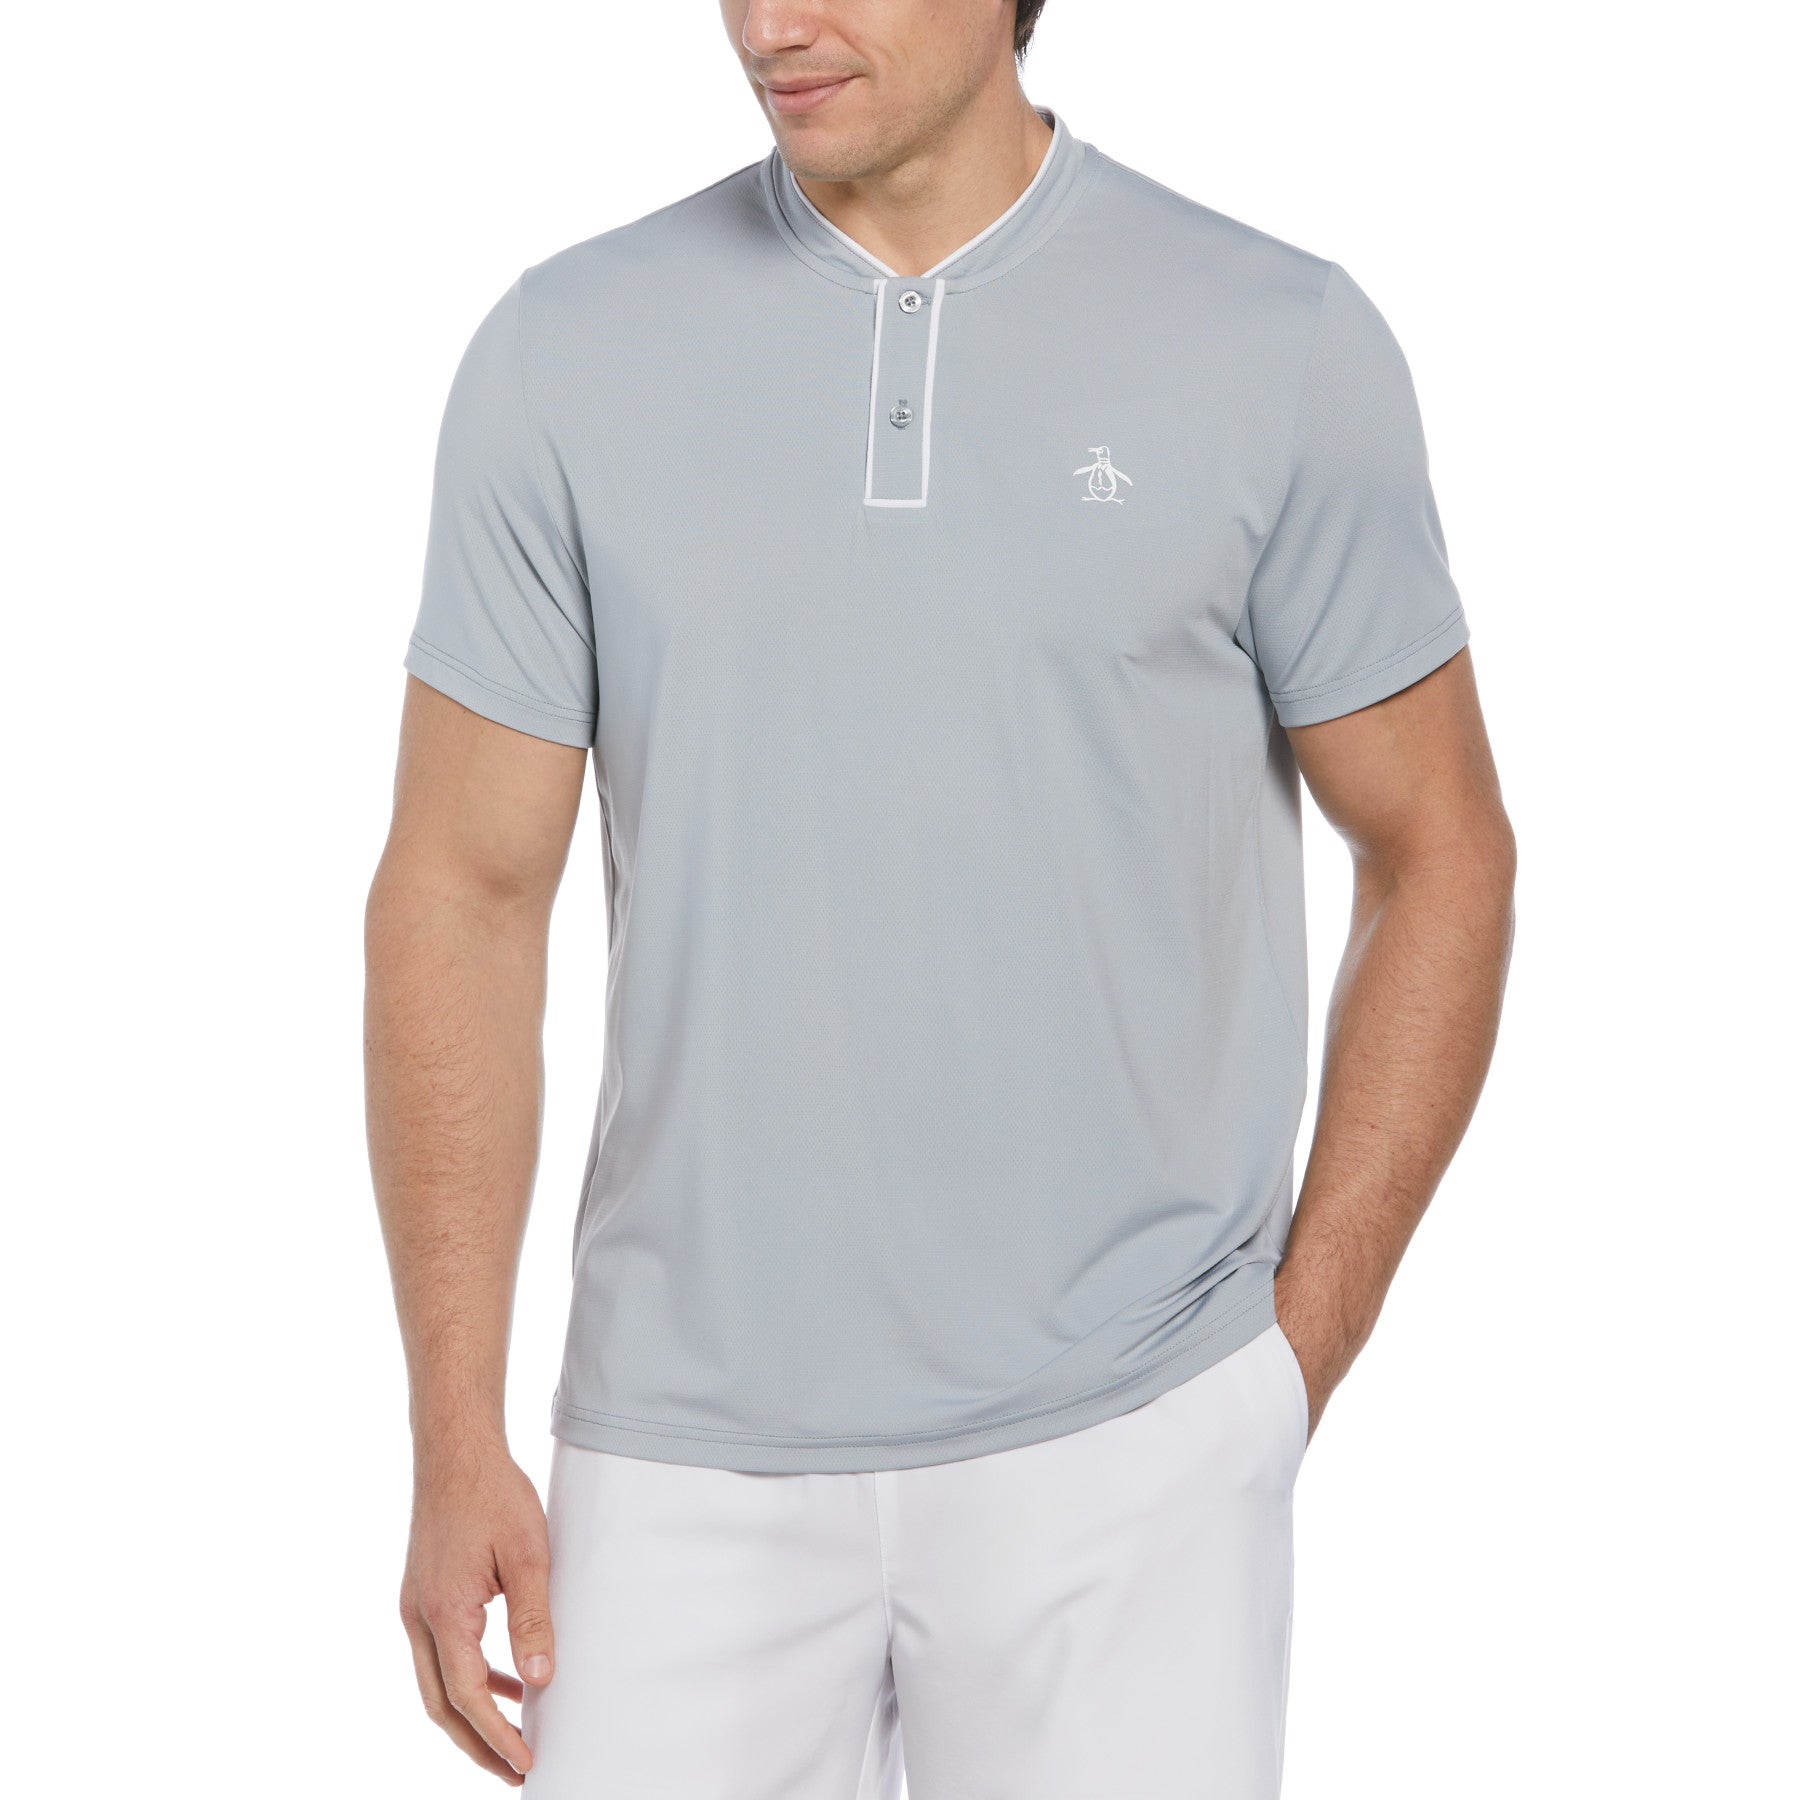 View Piped Blade Collar Performance Short Sleeve Tennis Polo Shirt In Quarr information